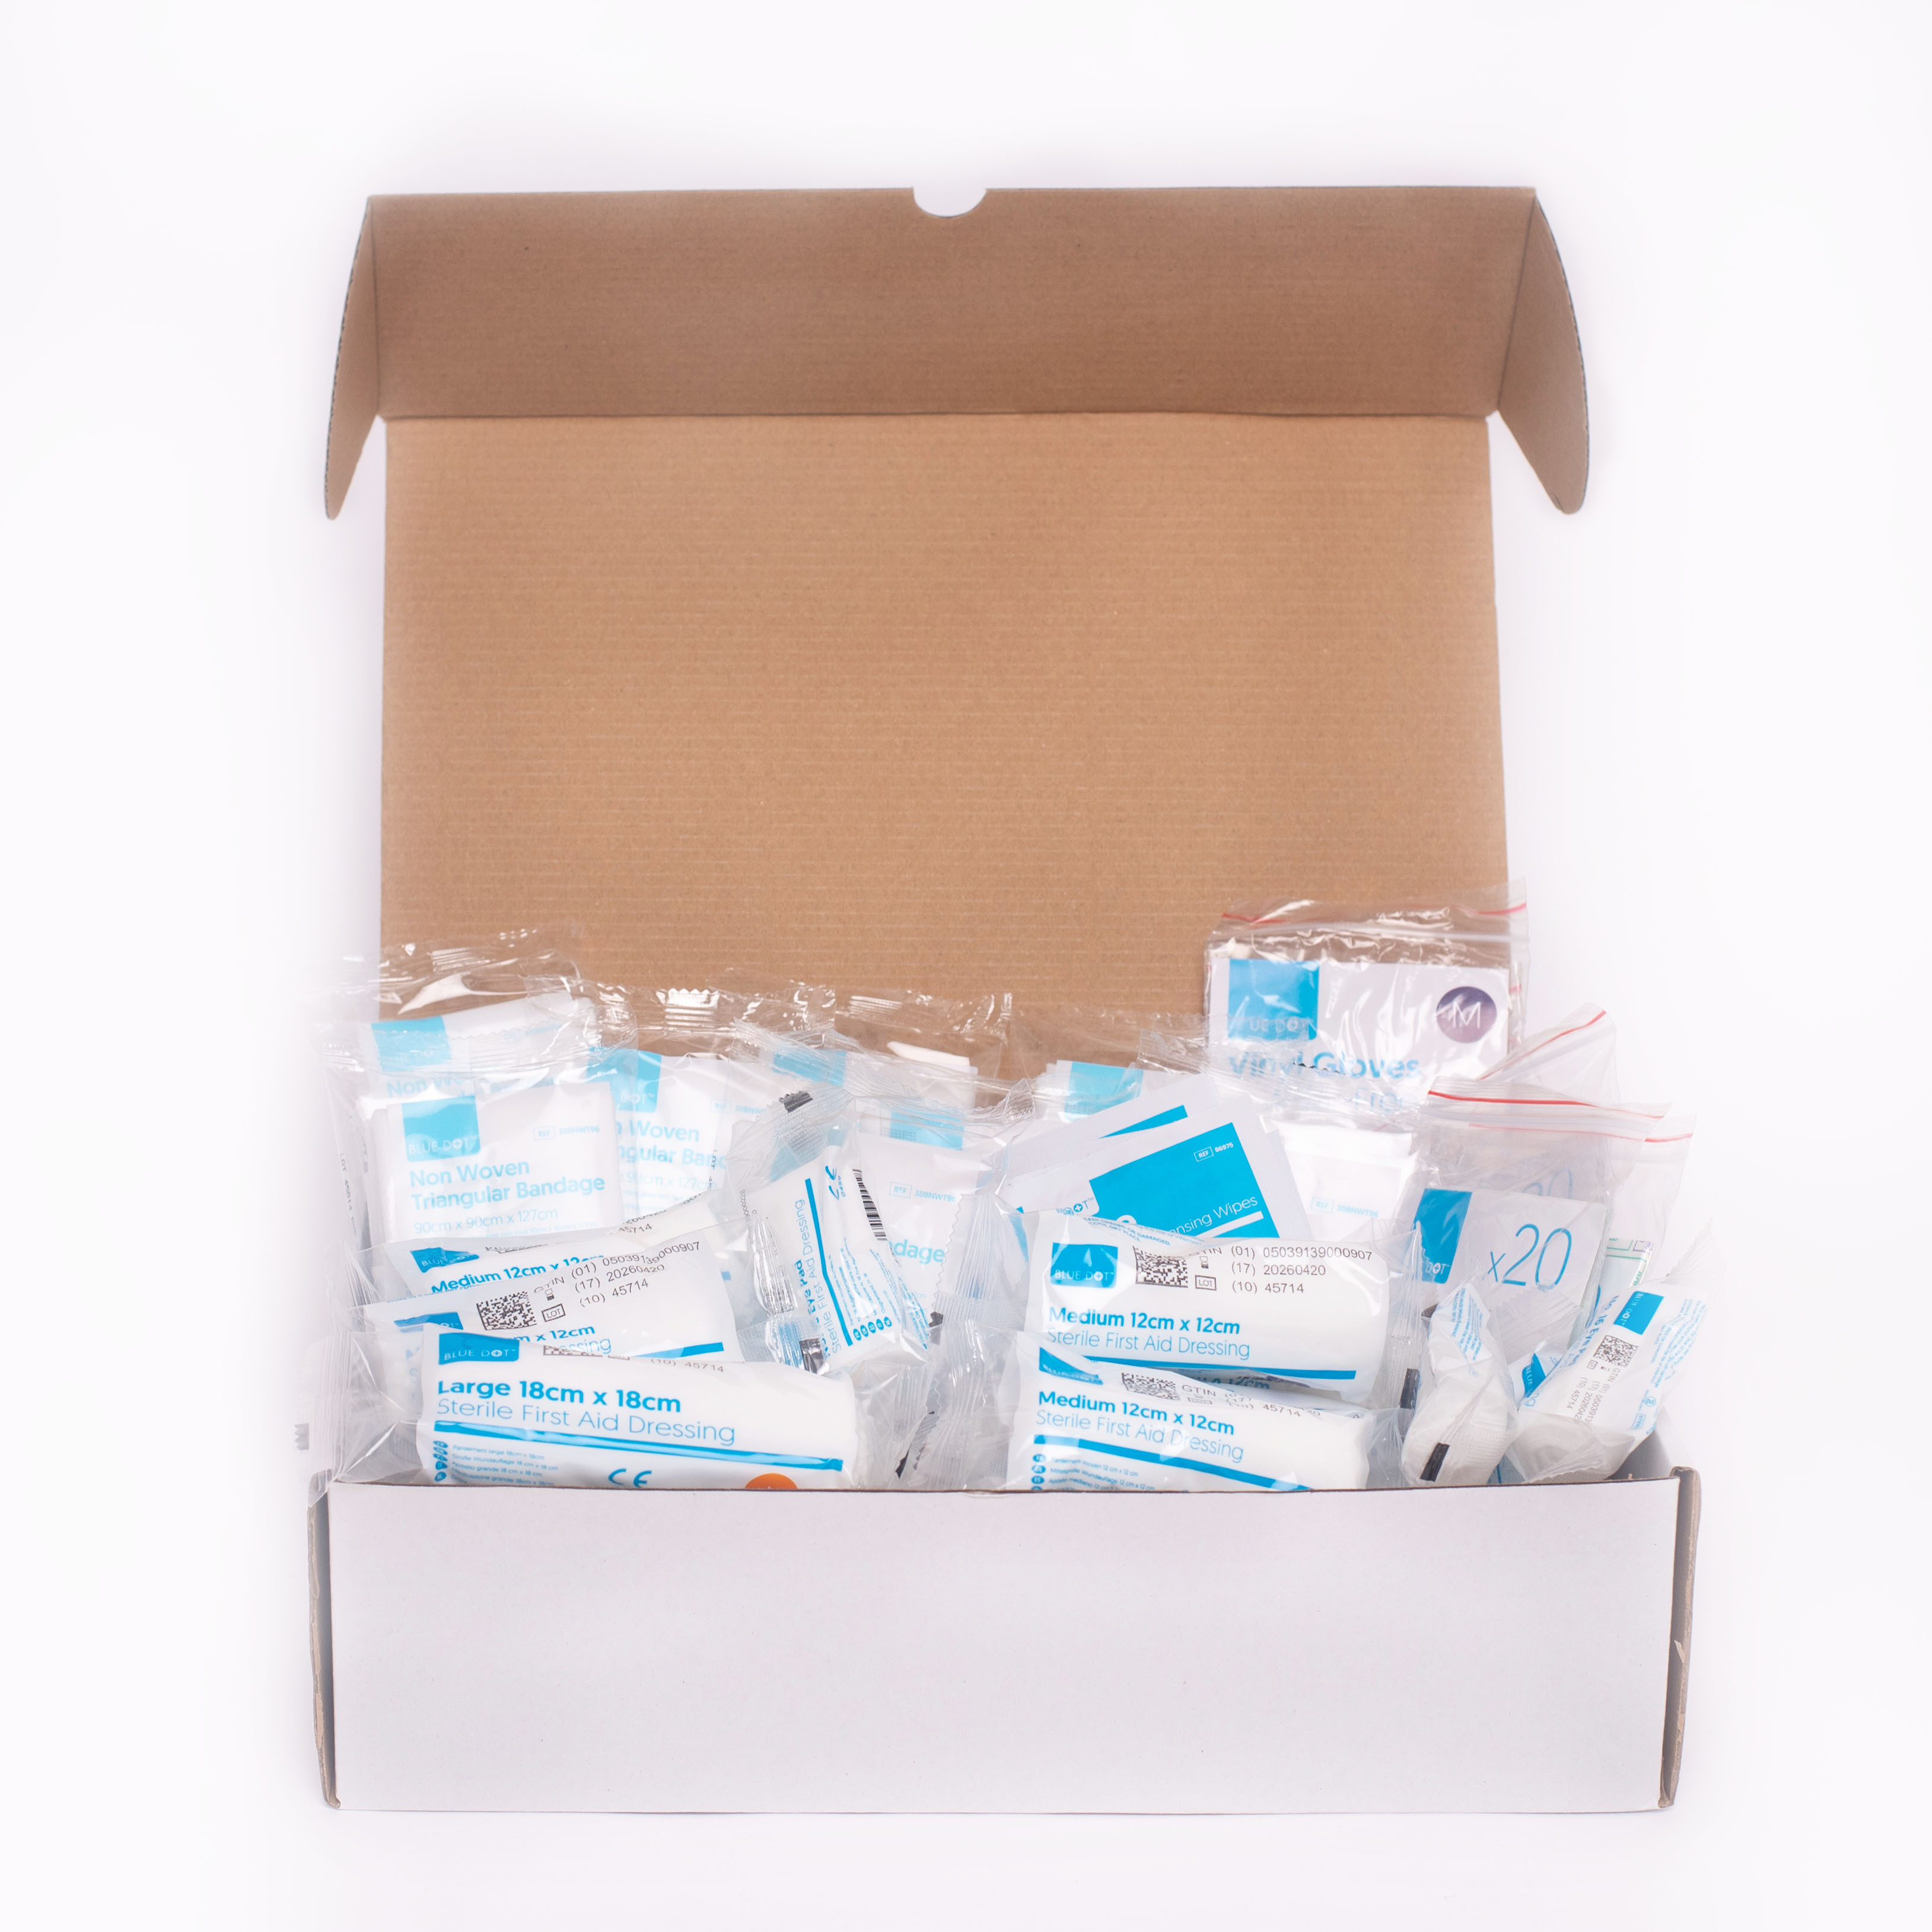 HSE Standard First Aid Kit Refill - 1-50 Person